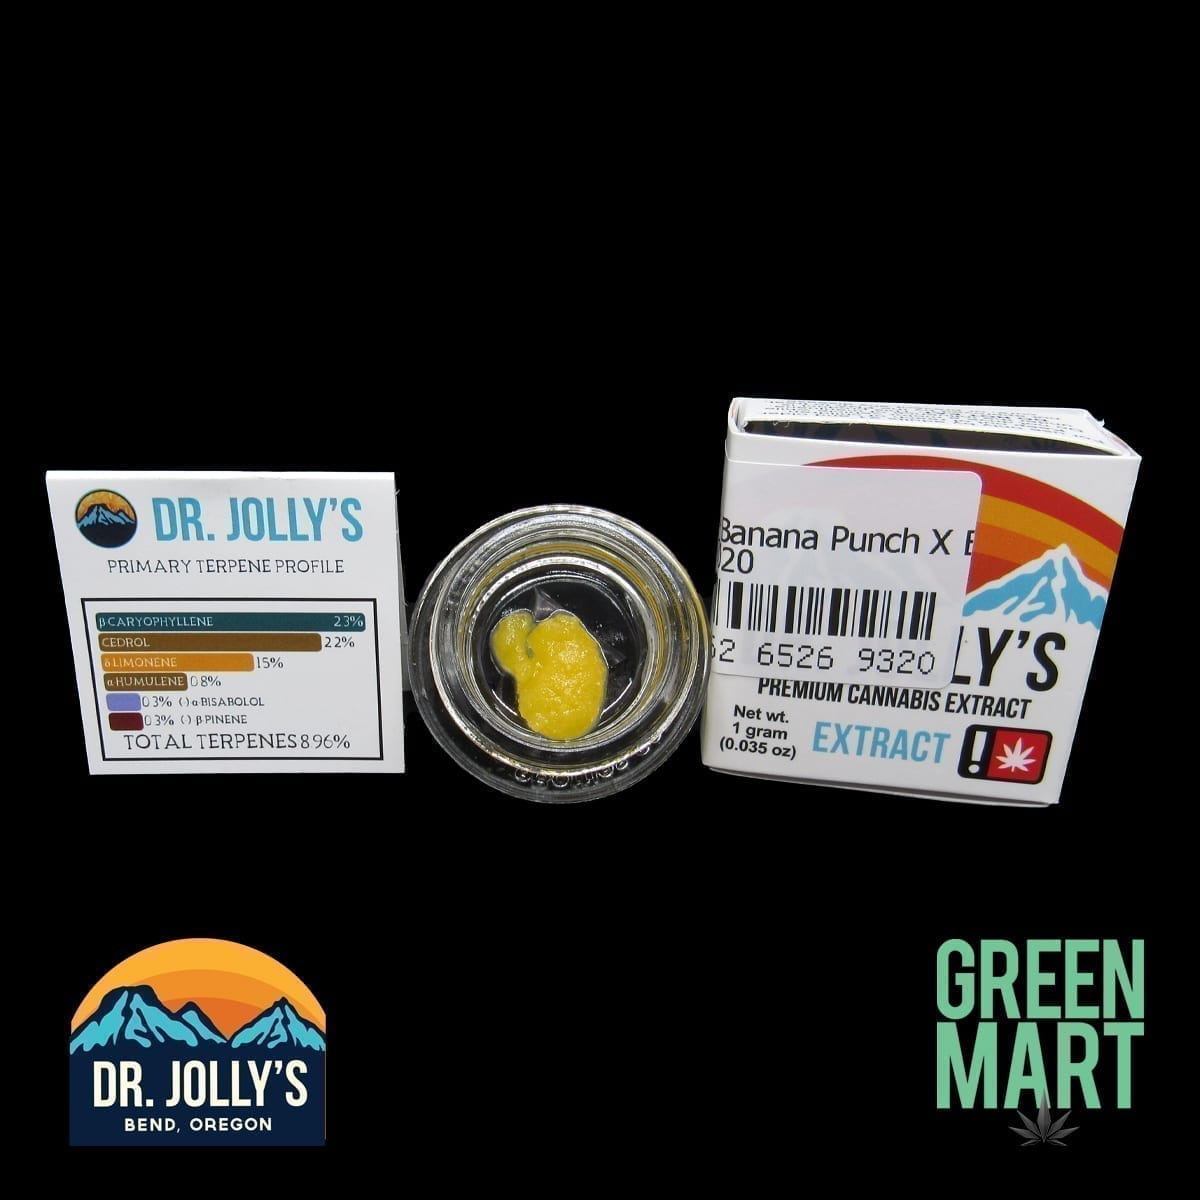 Dr. Jolly's Extracts - Banana Punch x Blueberry Muffins